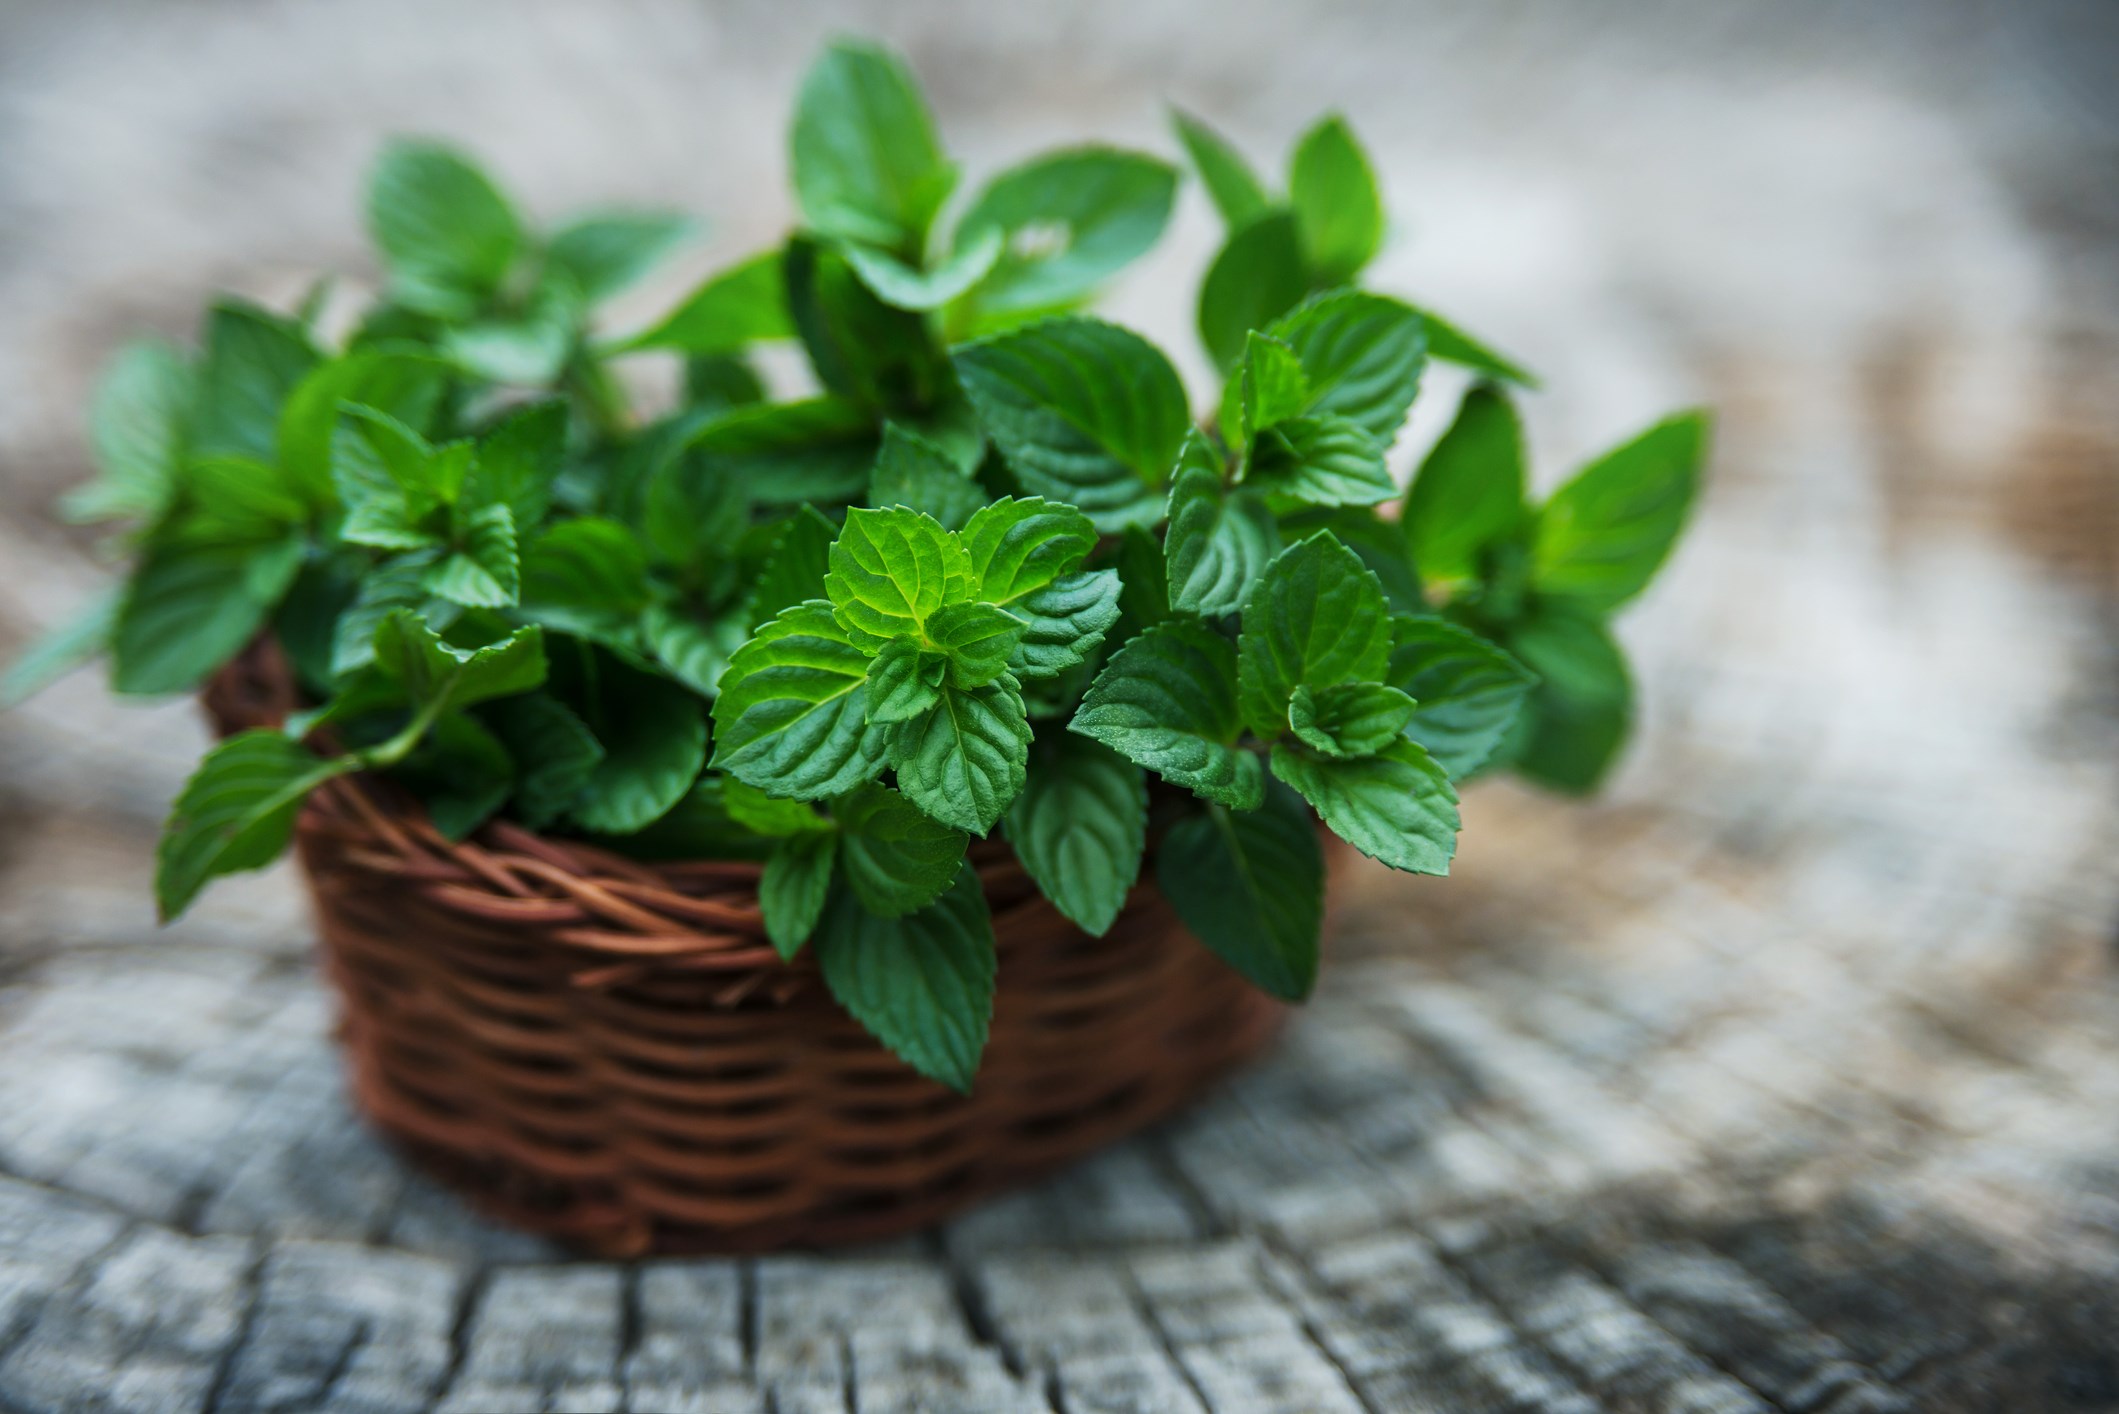 Mint in small basket on natural wooden background.